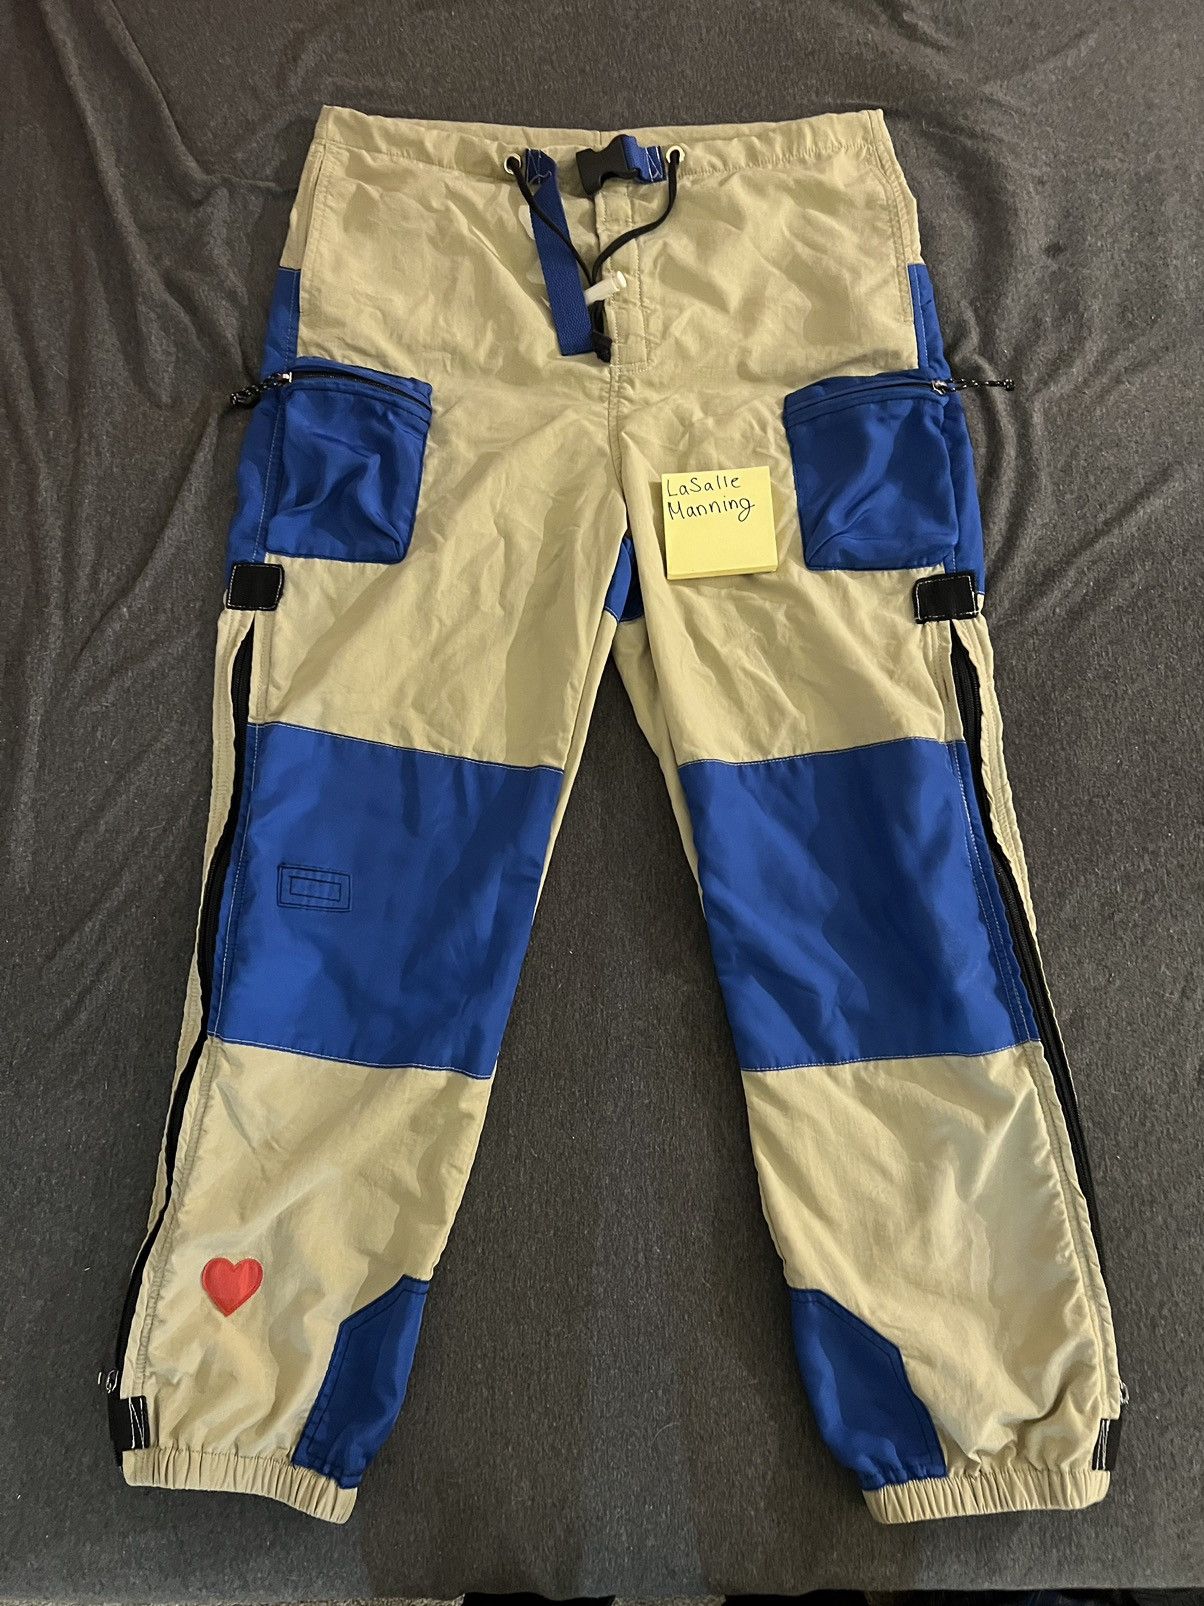 Round Two Round 2 Hiking Pants | Grailed